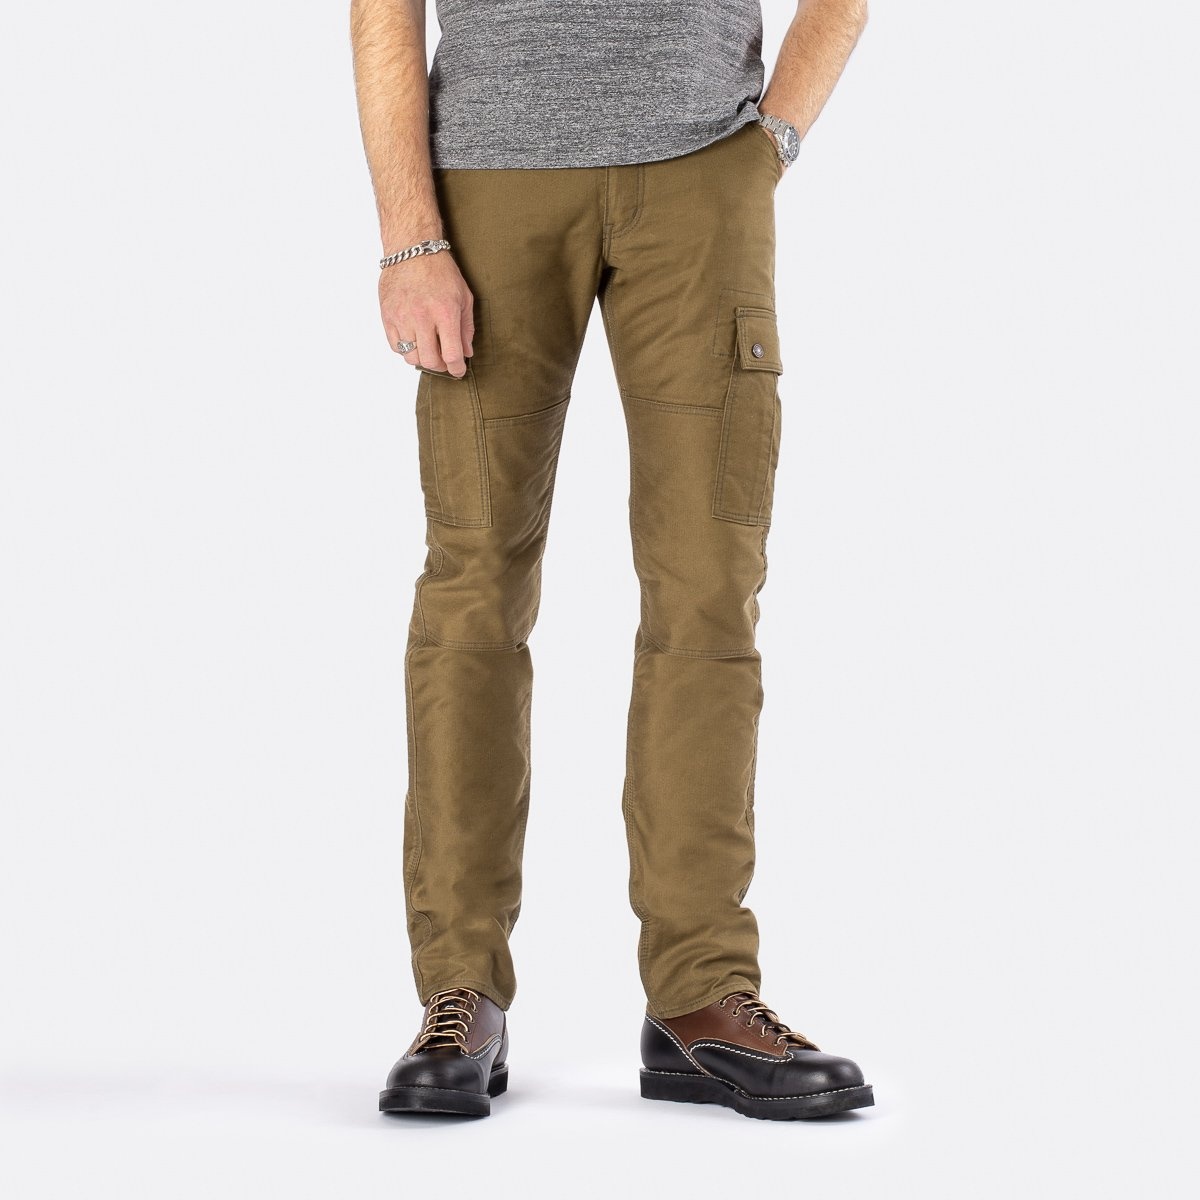 IHDR-502-OLV 11oz Cotton Whipcord Cargo Pants - Olive - 2